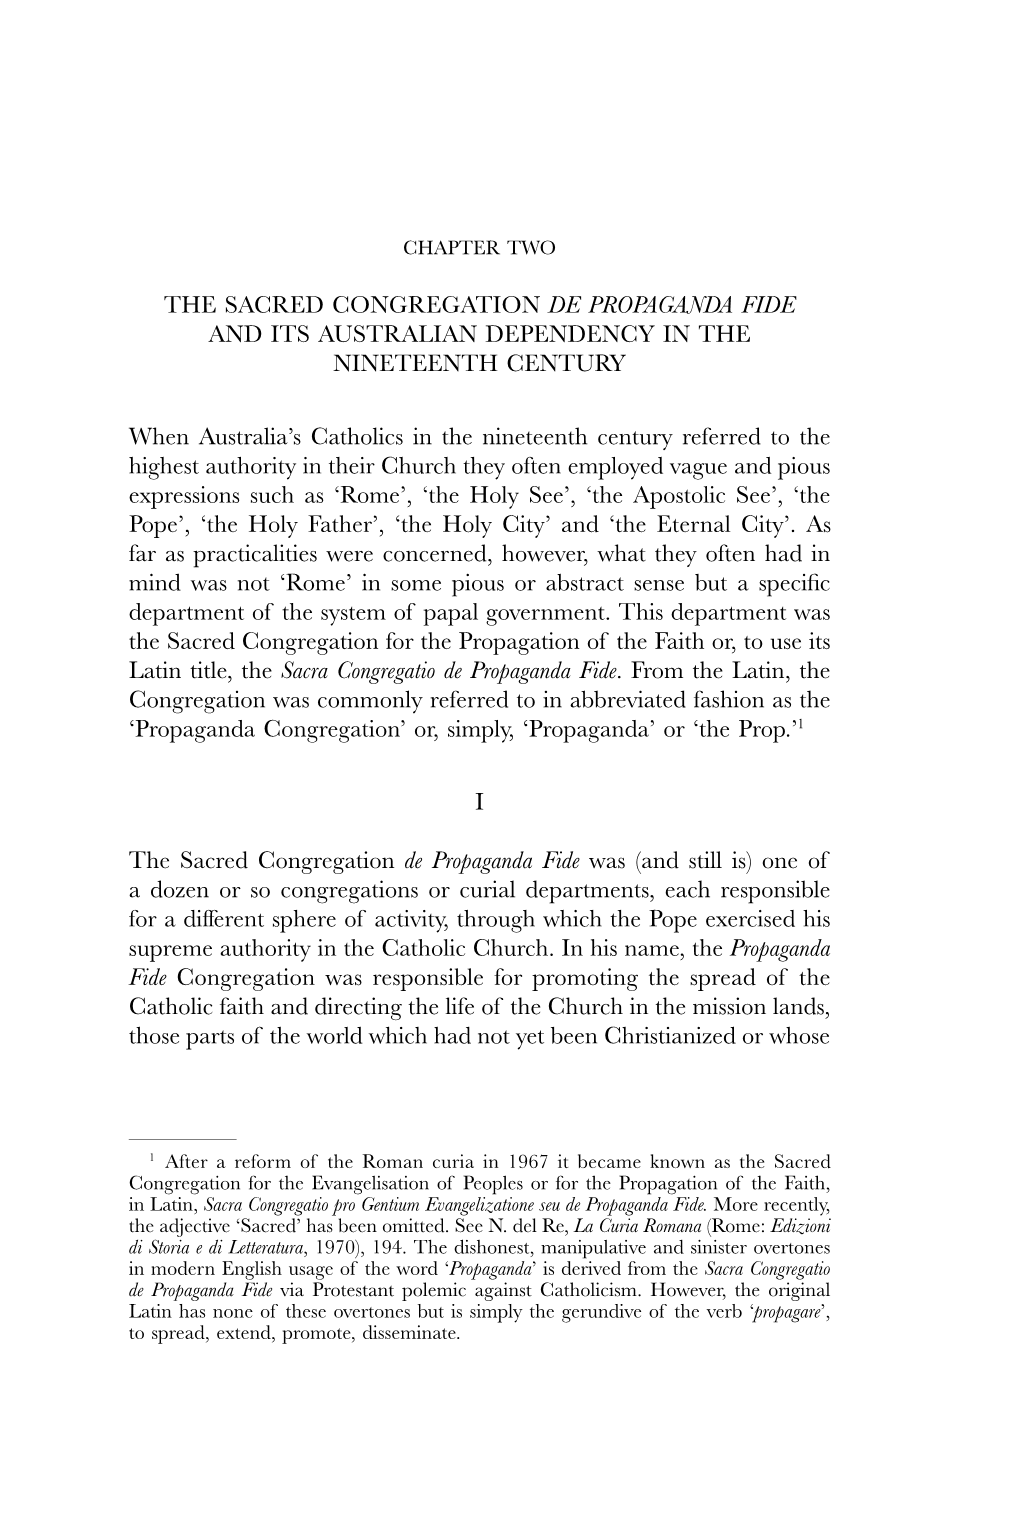 The Sacred Congregation De Propaganda Fide and Its Australian Dependency in the Nineteenth Century